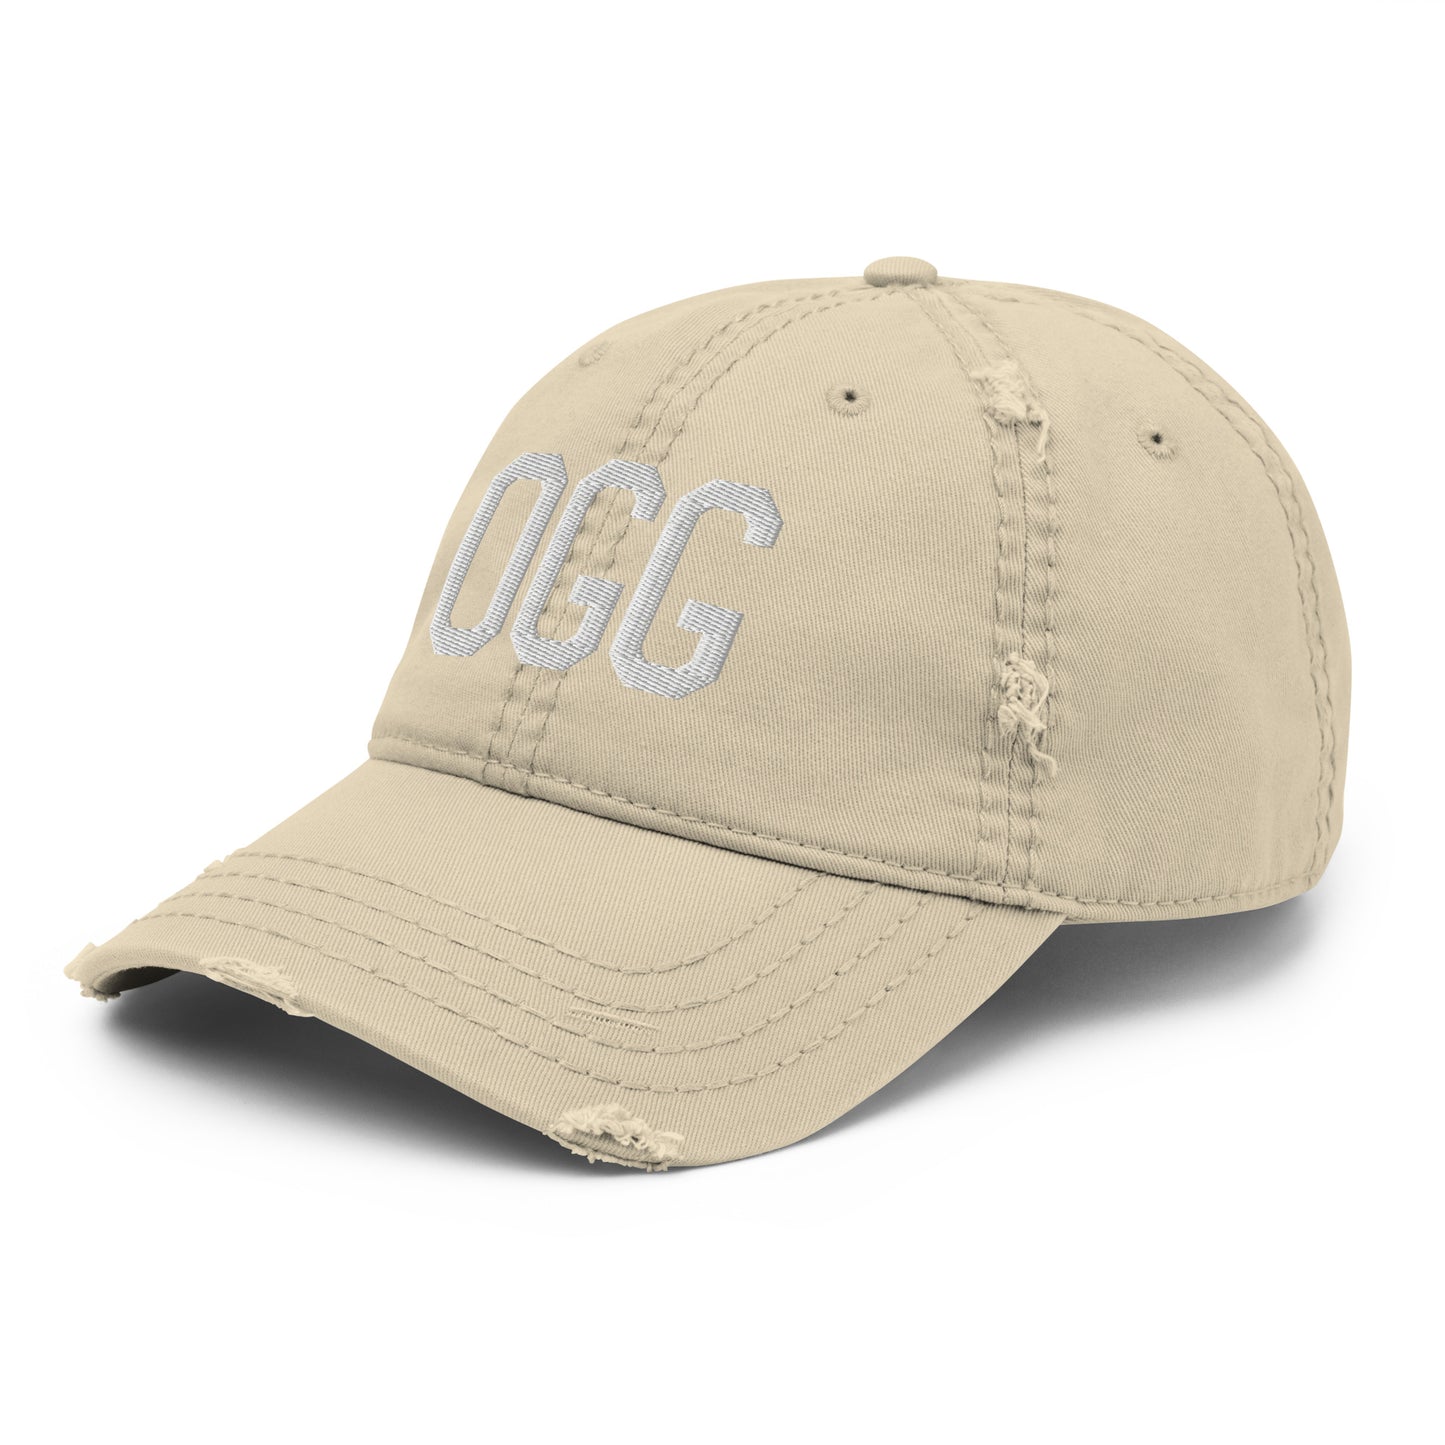 Airport Code Distressed Hat - White • OGG Maui • YHM Designs - Image 19